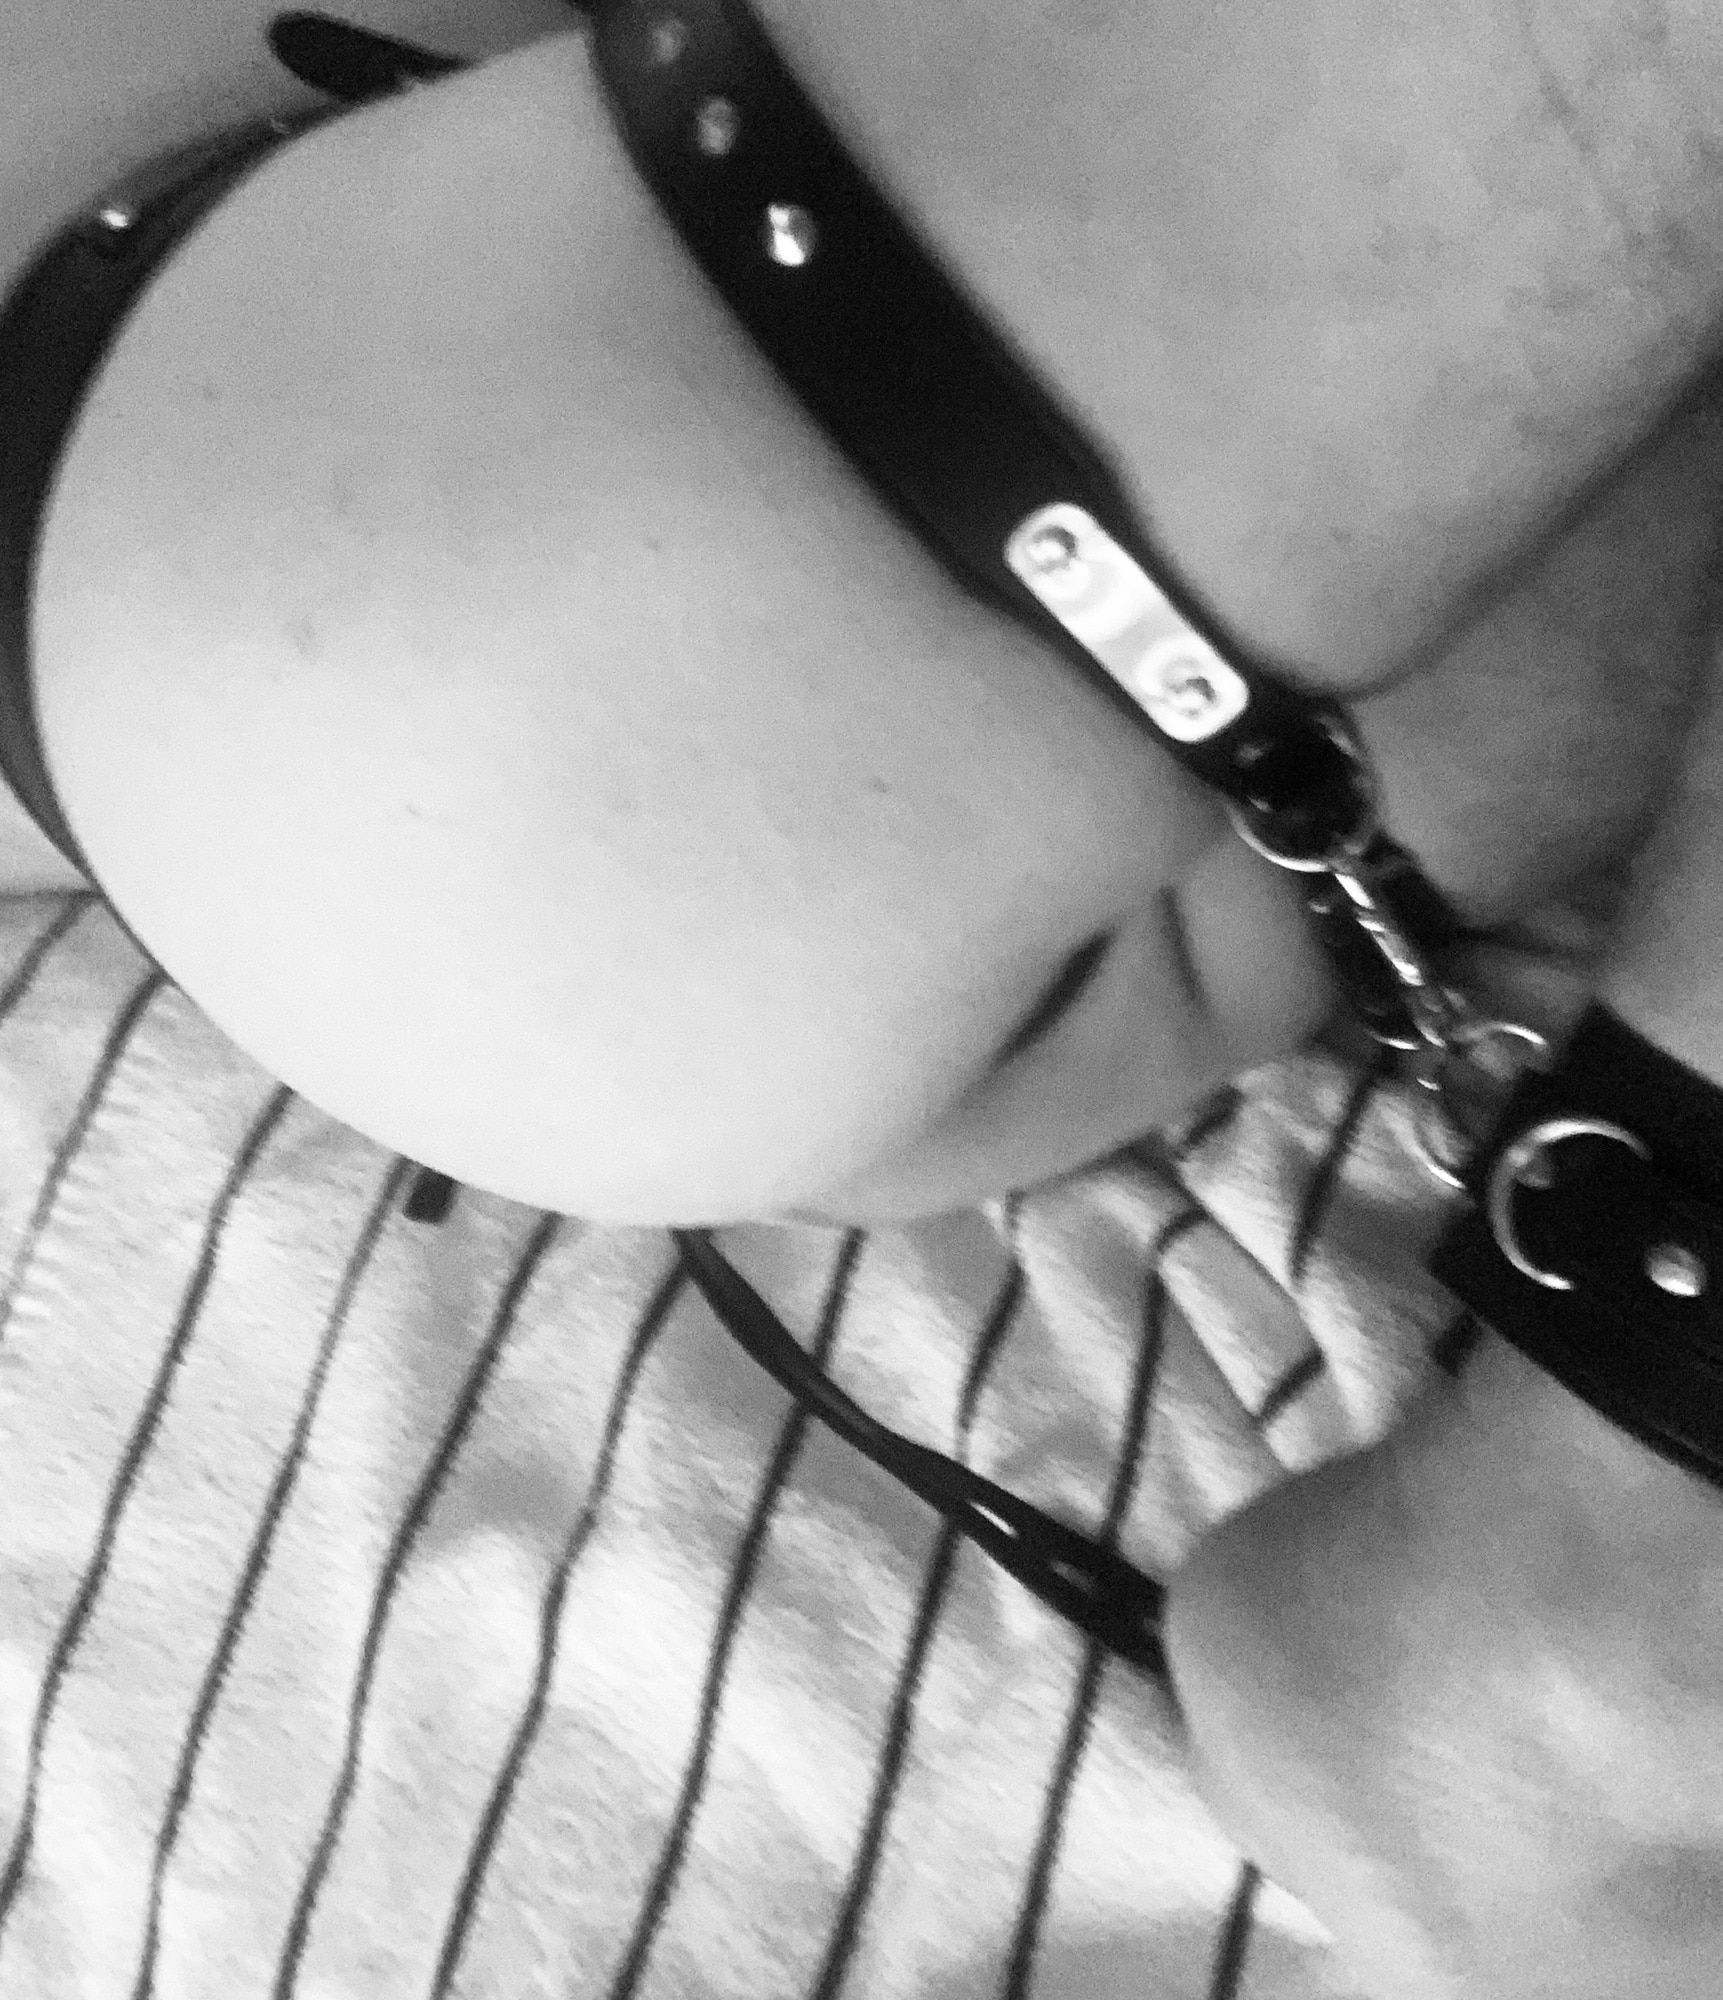 Restrained, chained , chastity and plugged  #5